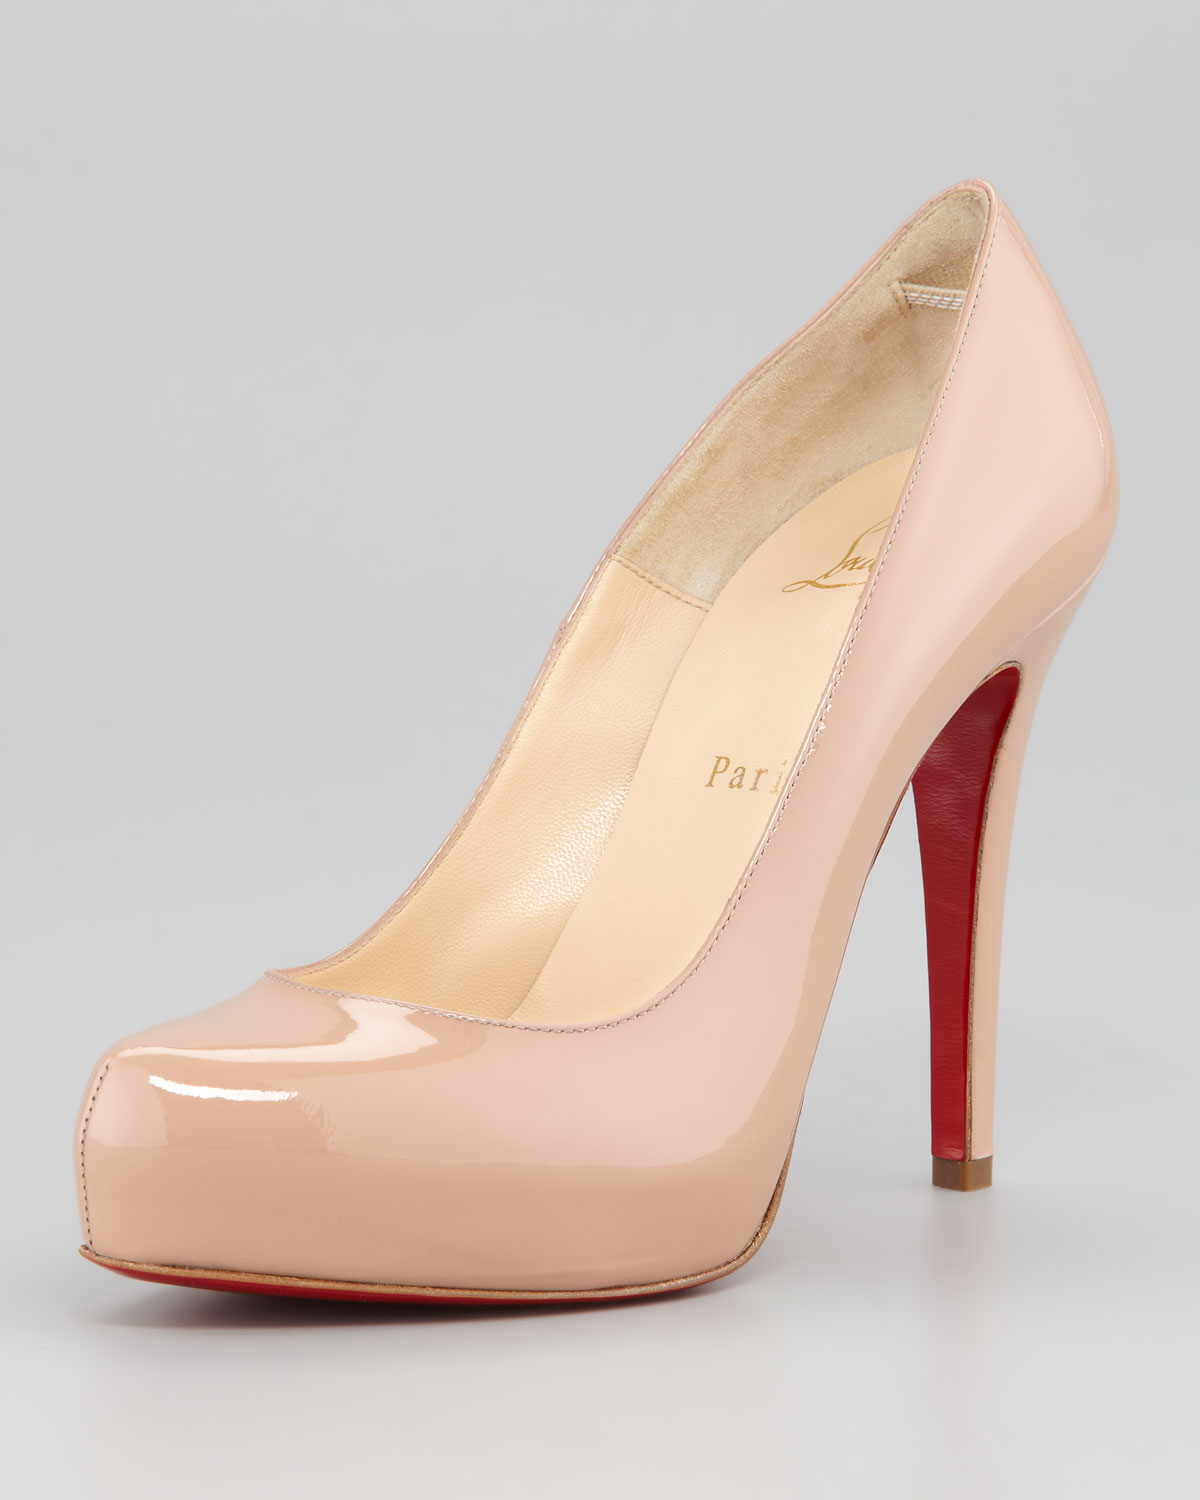 replica mens shoes - Christian louboutin Patent Rolando in Beige (NUDE) | Lyst